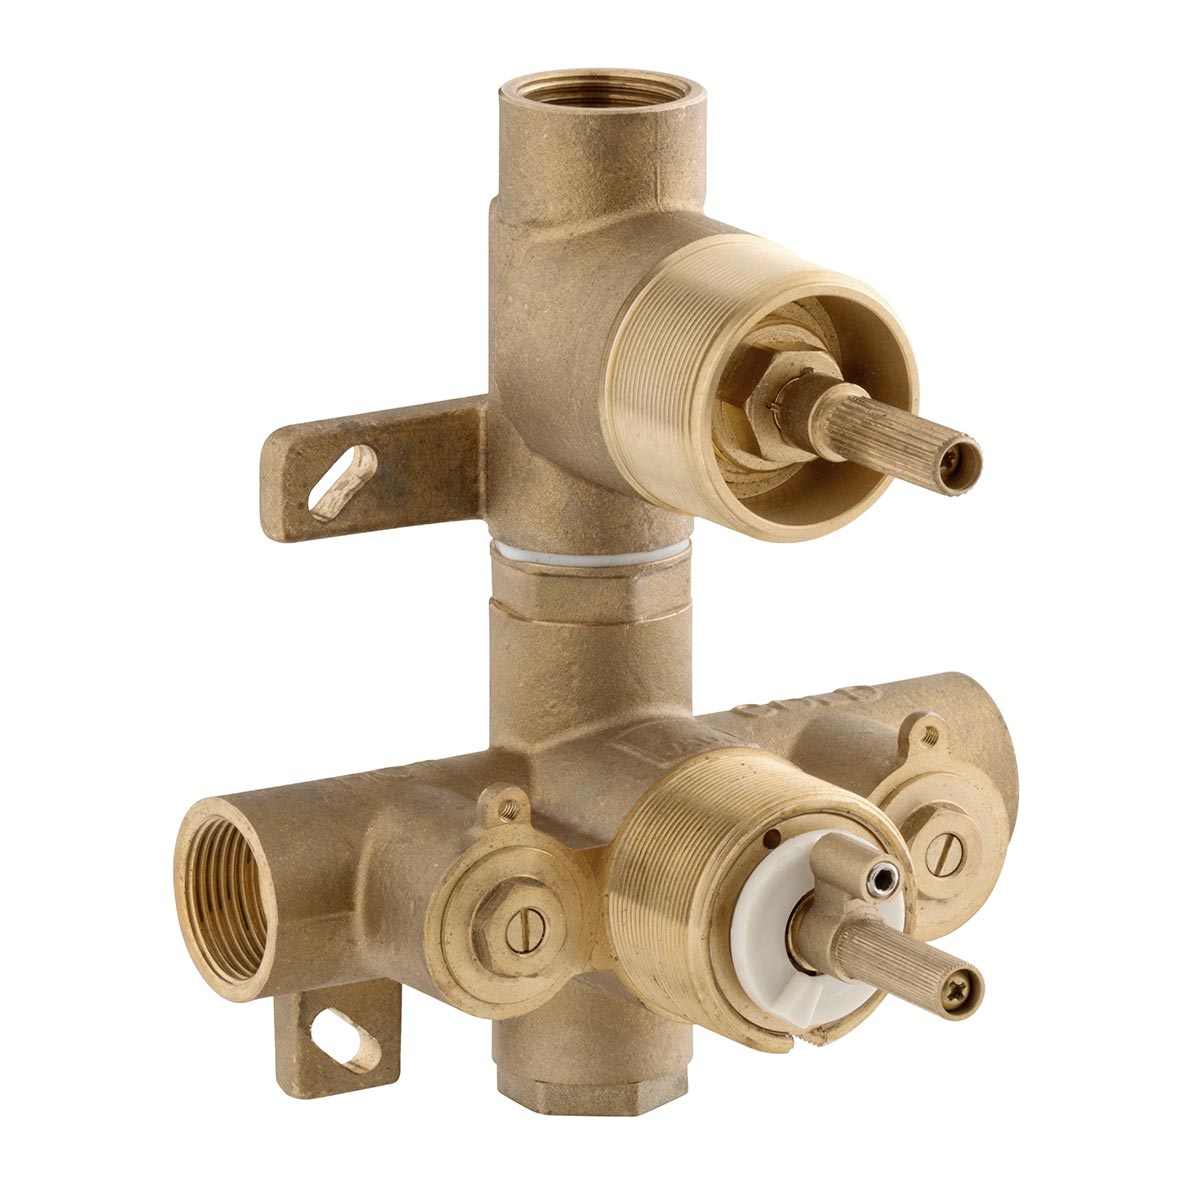 The hidden parts of a concealed thermostatic wall valve